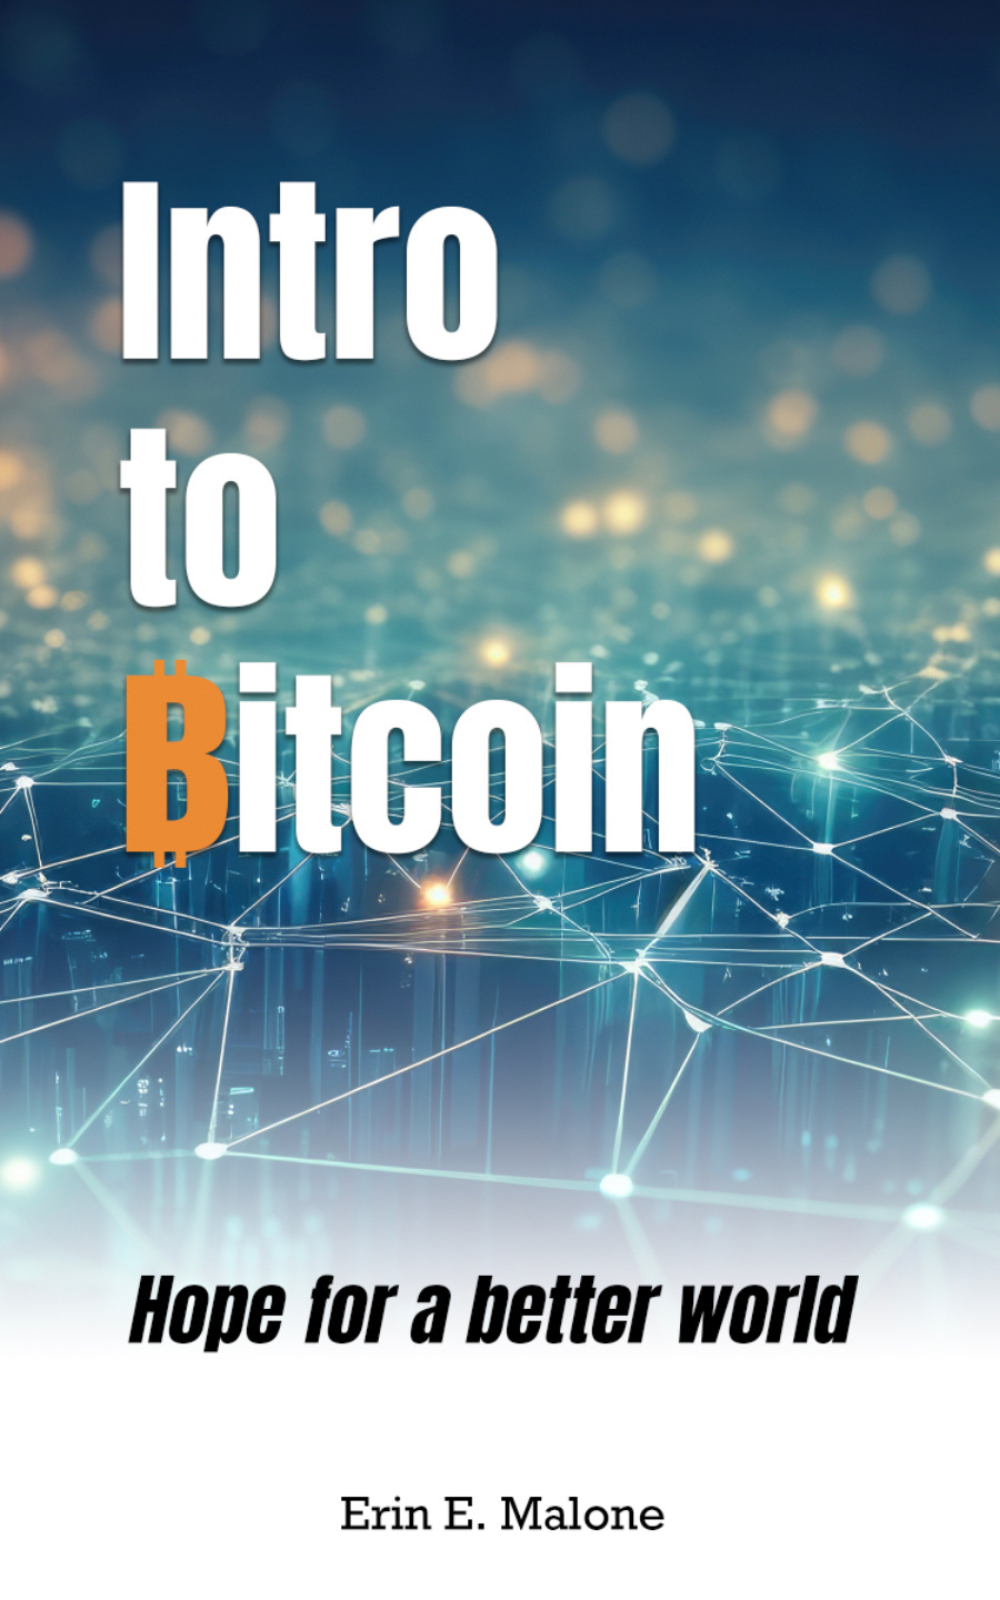 Intro to Bitcoin: Hope For a Better World - fomo21